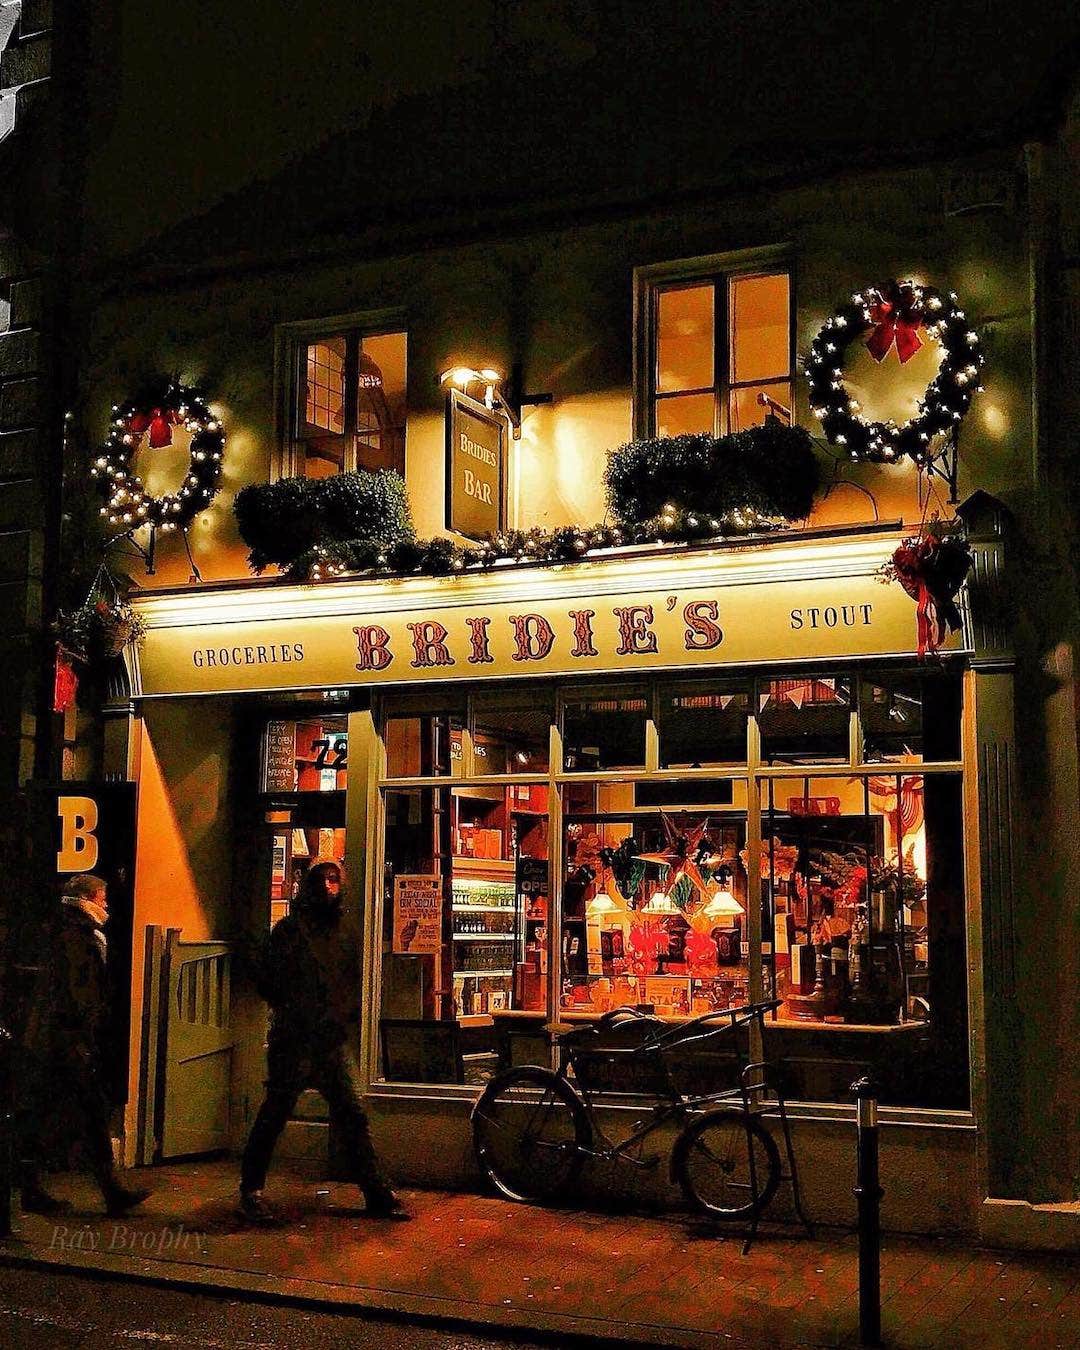 Visit Bridie's, an old-world bar and general store with a charming walled garden.